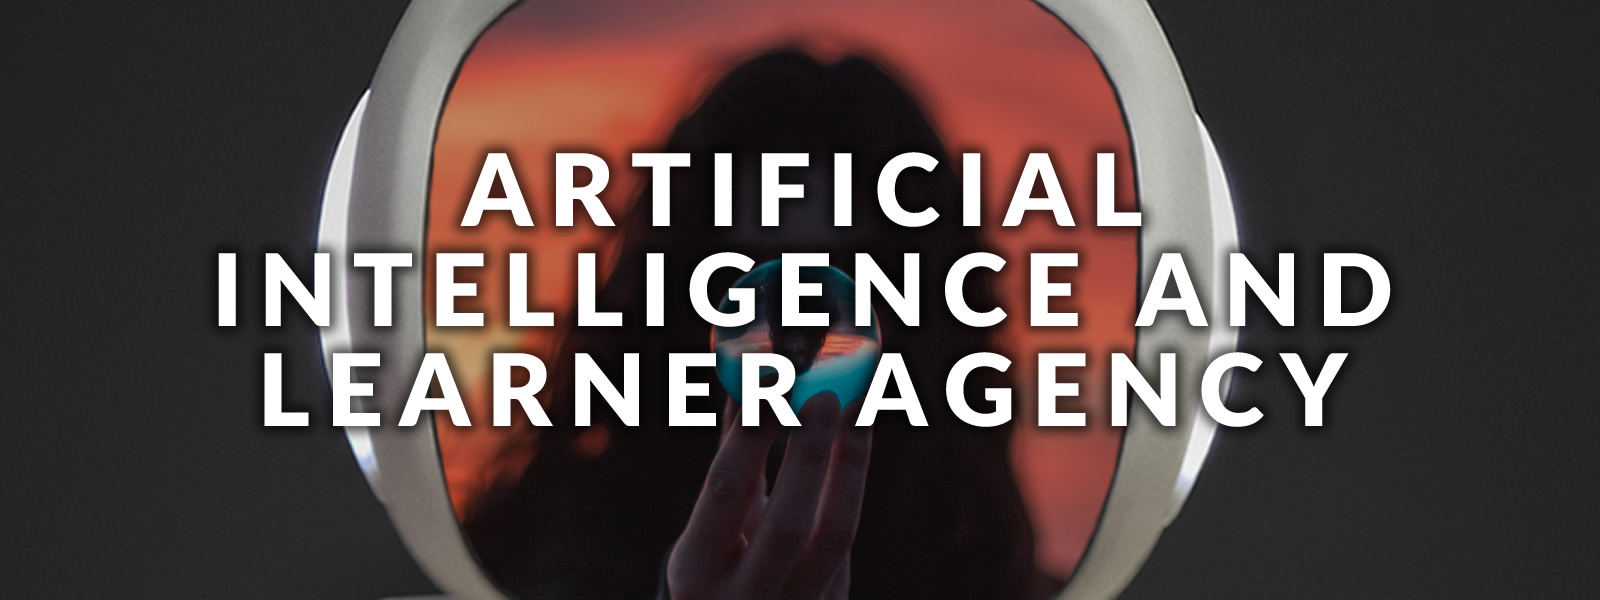 Artifical Intelligence and Learner Agency Project